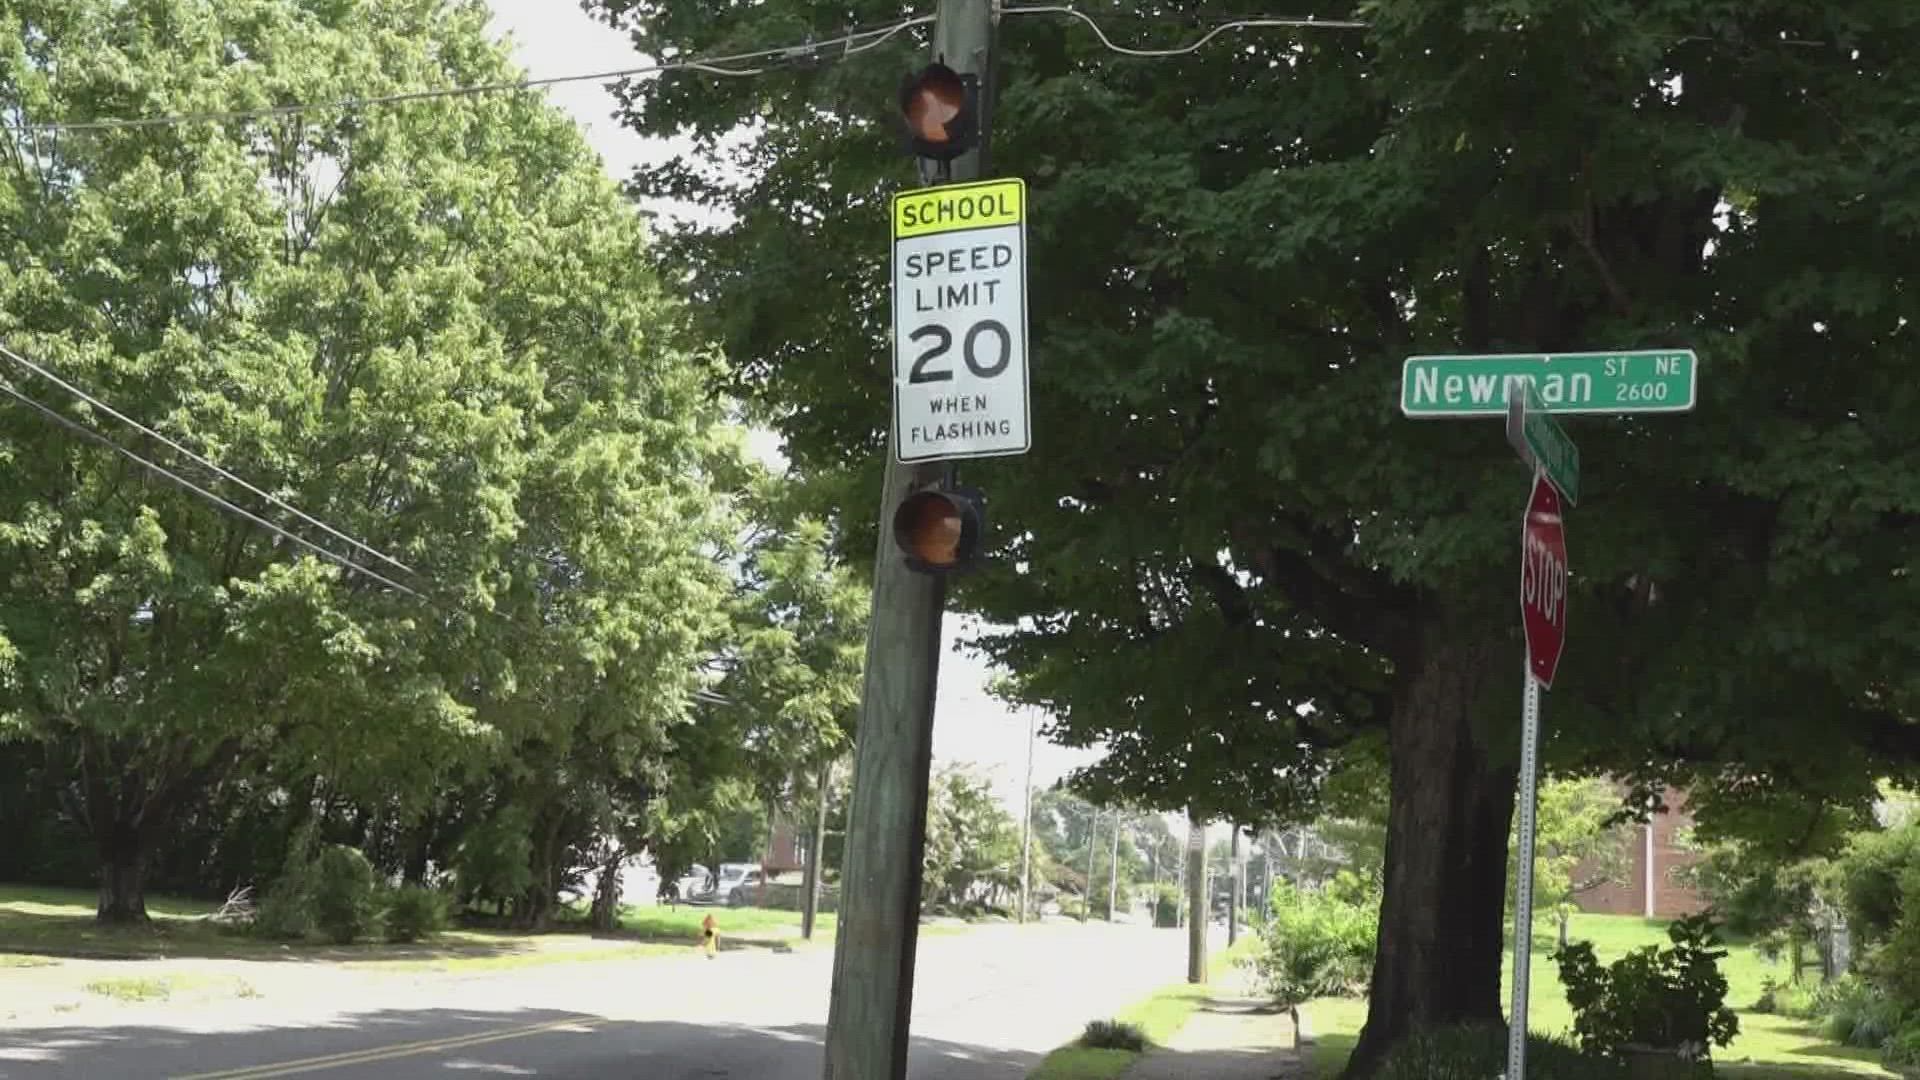 KPD said 30 of the citations were for speeding in school zones.